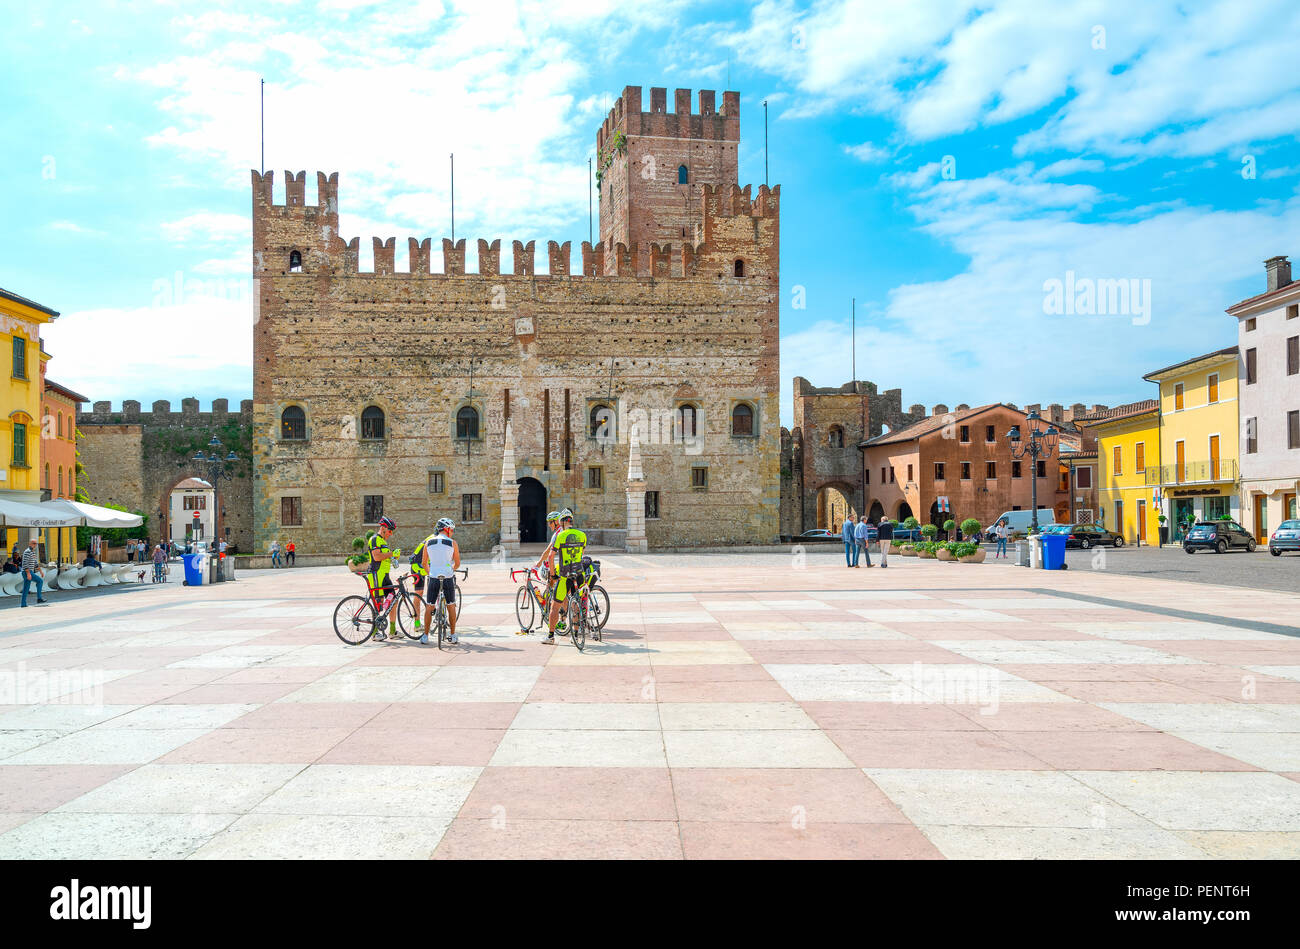 Marostica, Italy - May 26, 2017: The square where the traditional chess game is played with the Lower Castle in the background Stock Photo